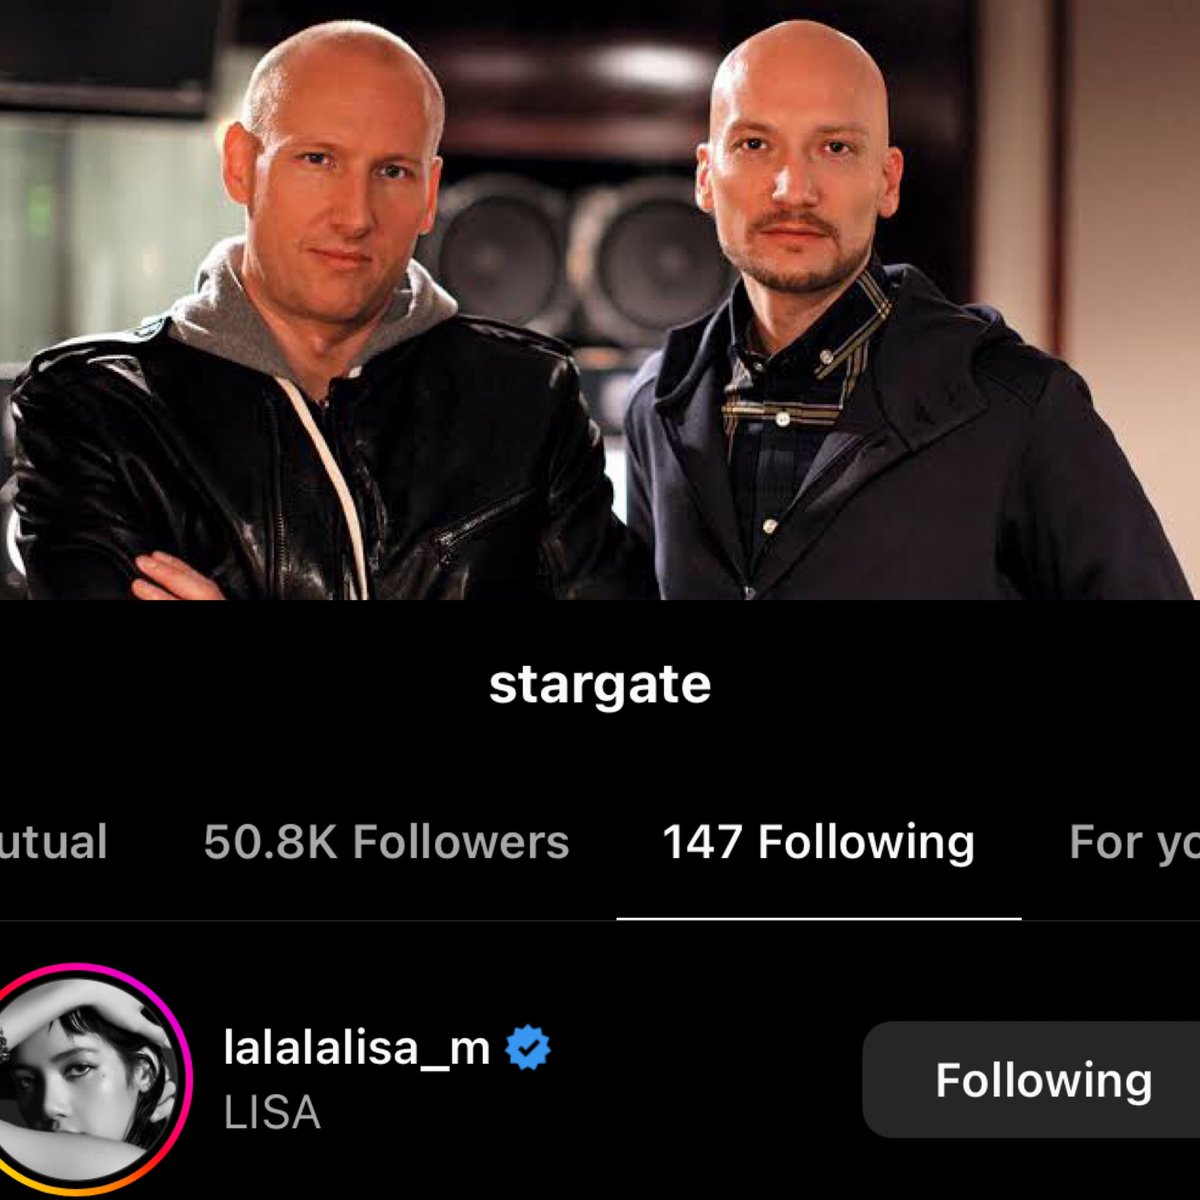 STARGATE (Mikkel Eriksen & Tor Hermansen, songwriter & producer) just followed #LISA on IG. (The team's genres include R&B, pop and hip hop. Since 2006, Norwegian songwriting and production duo Stargate have been storming charts around the world. In the US alone, they have…